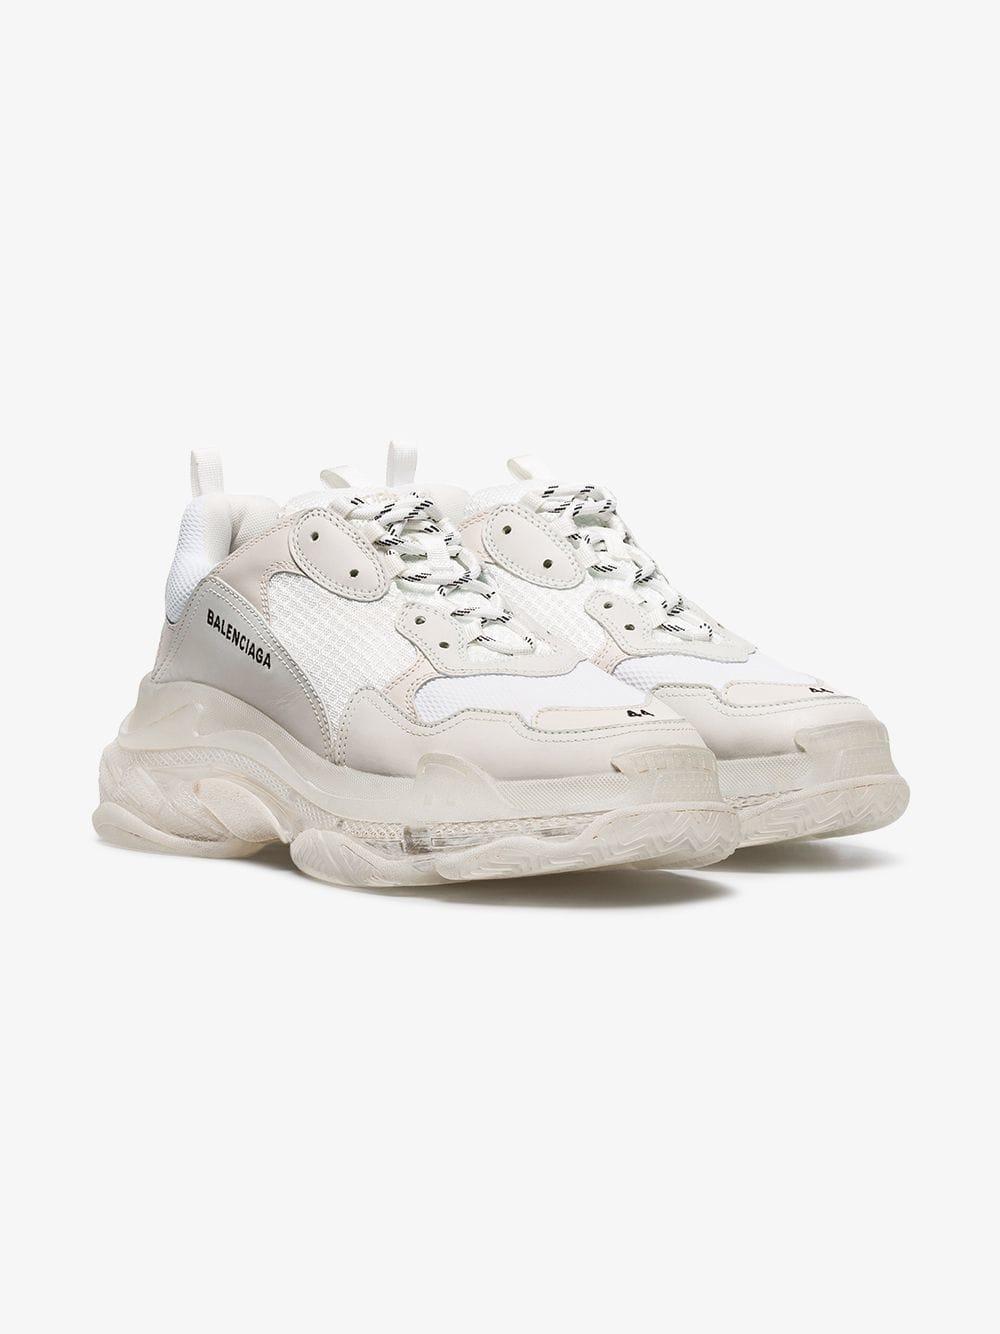 Balenciaga Synthetic Triple S Clear Sole Sneaker in Beige (White) for Men -  Save 39% - Lyst